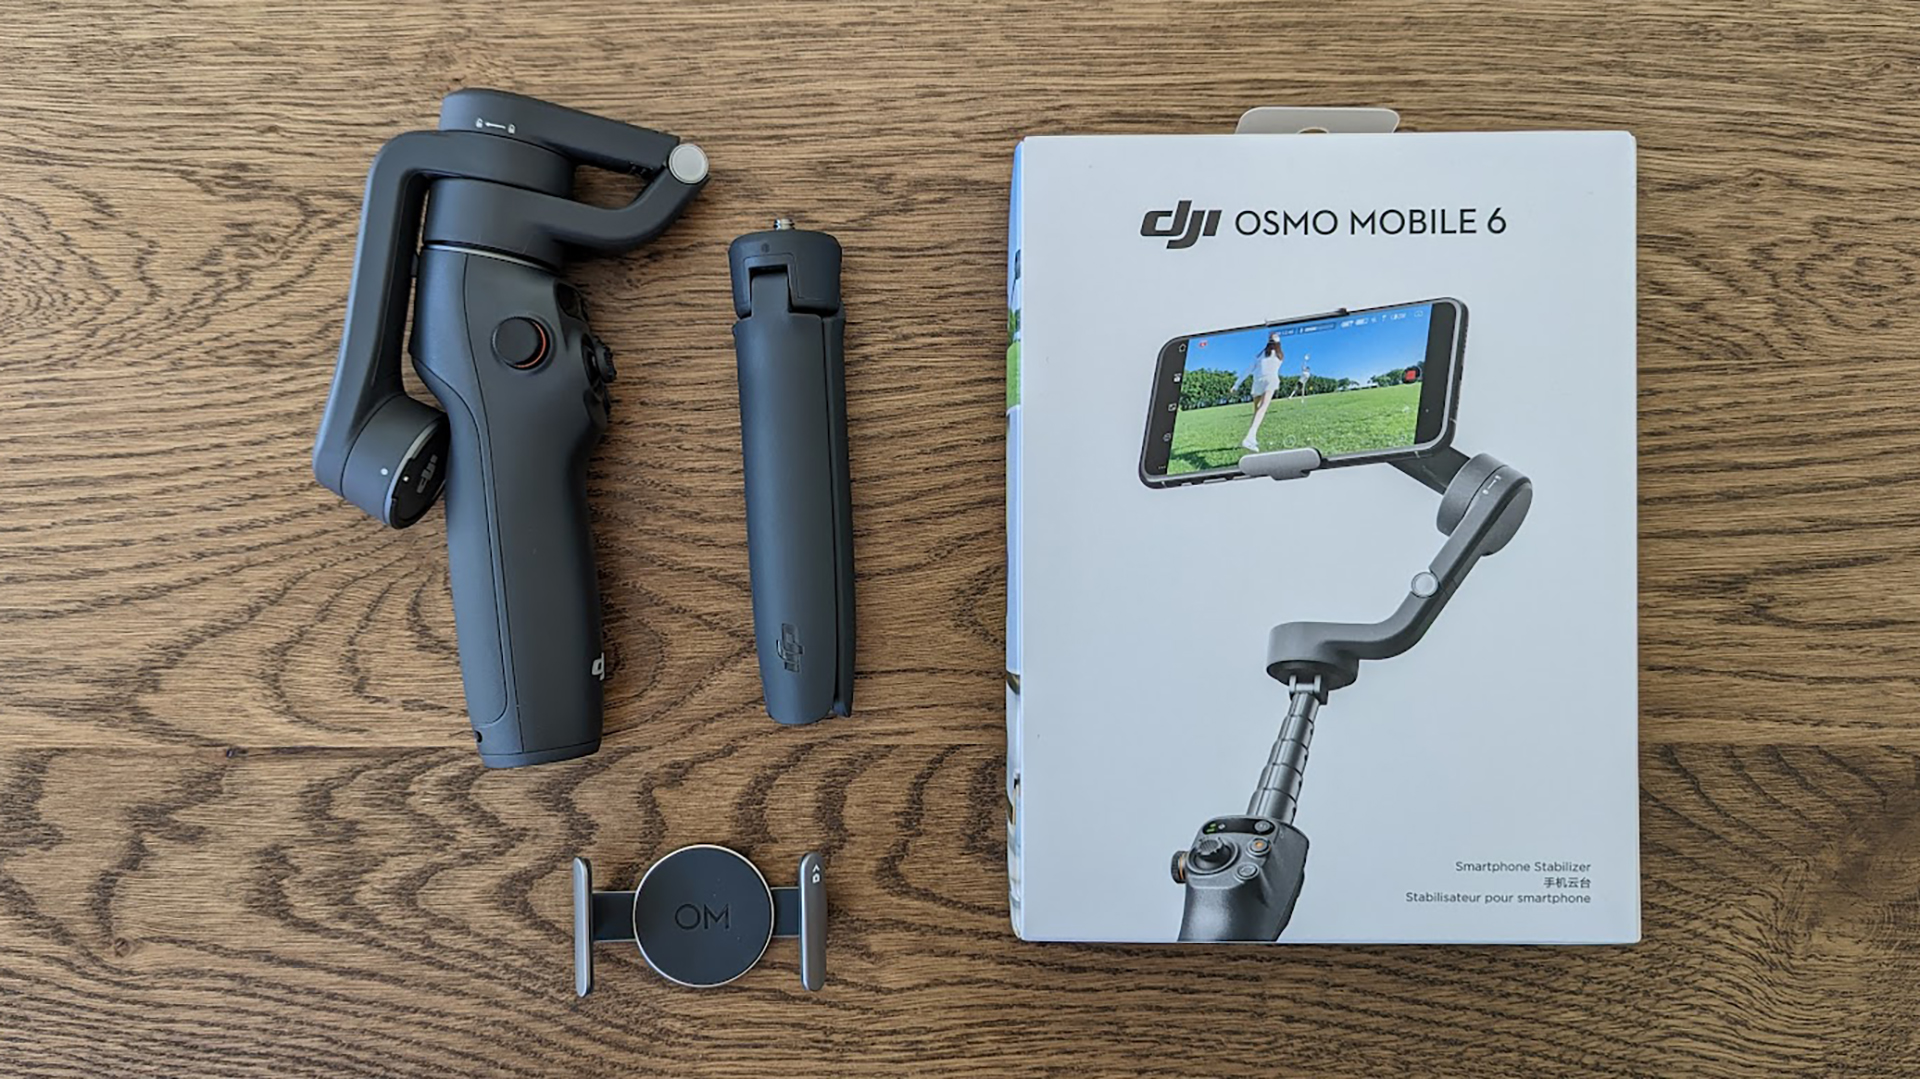 DJI Osmo Mobile 6 Review Retail Box Contents